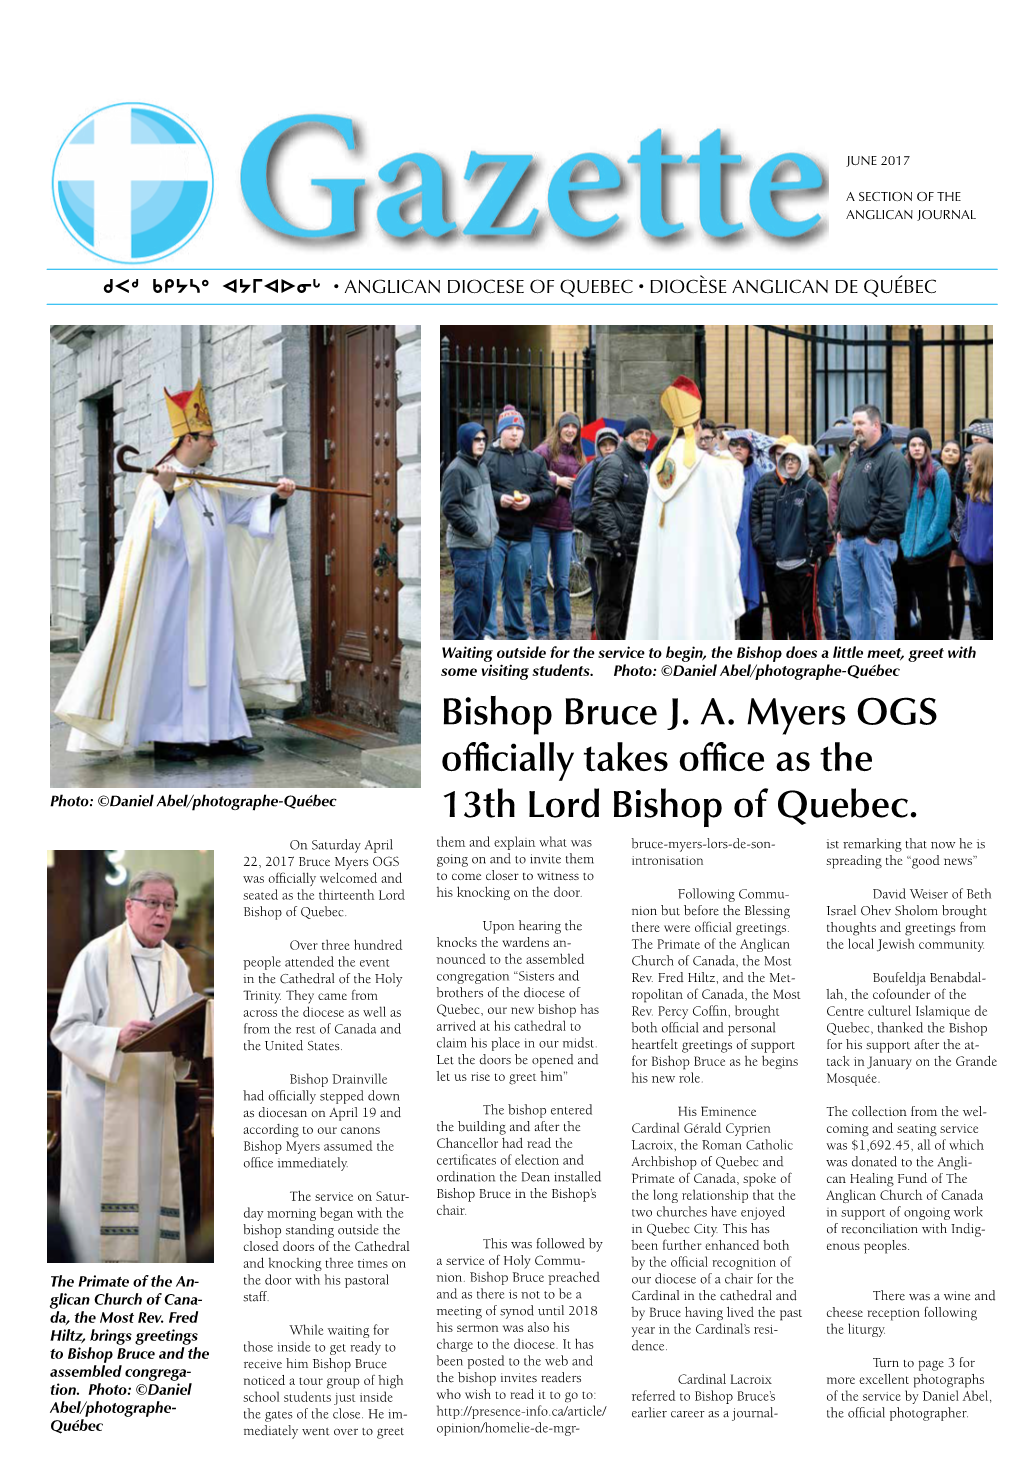 Bishop Bruce J. A. Myers OGS Officially Takes Office As the 13Th